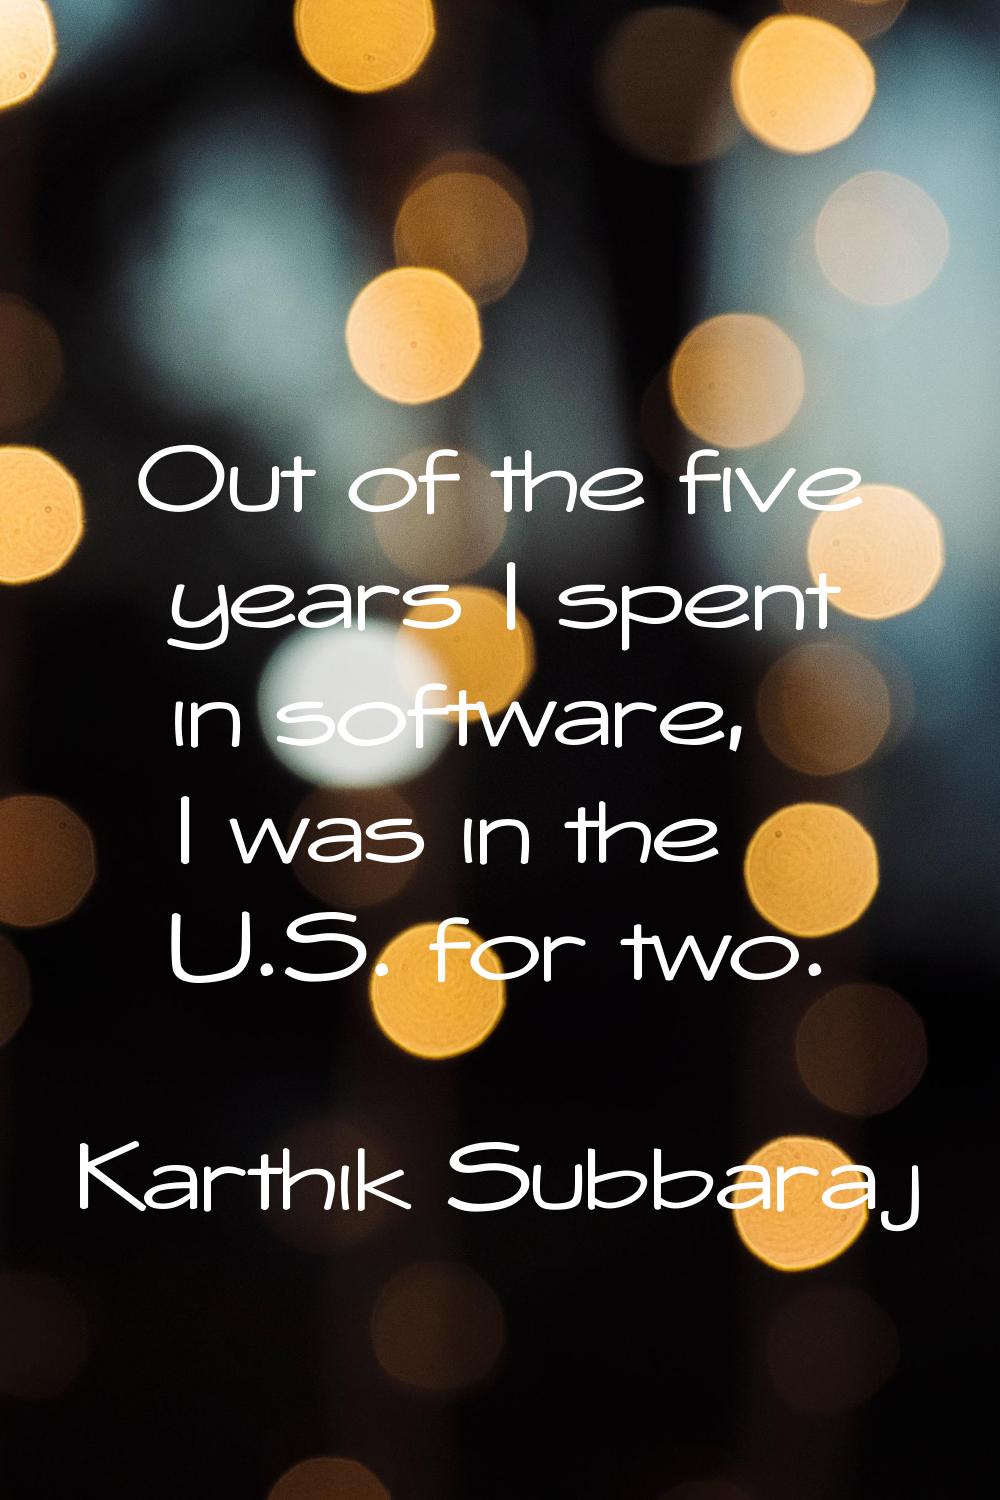 Out of the five years I spent in software, I was in the U.S. for two.